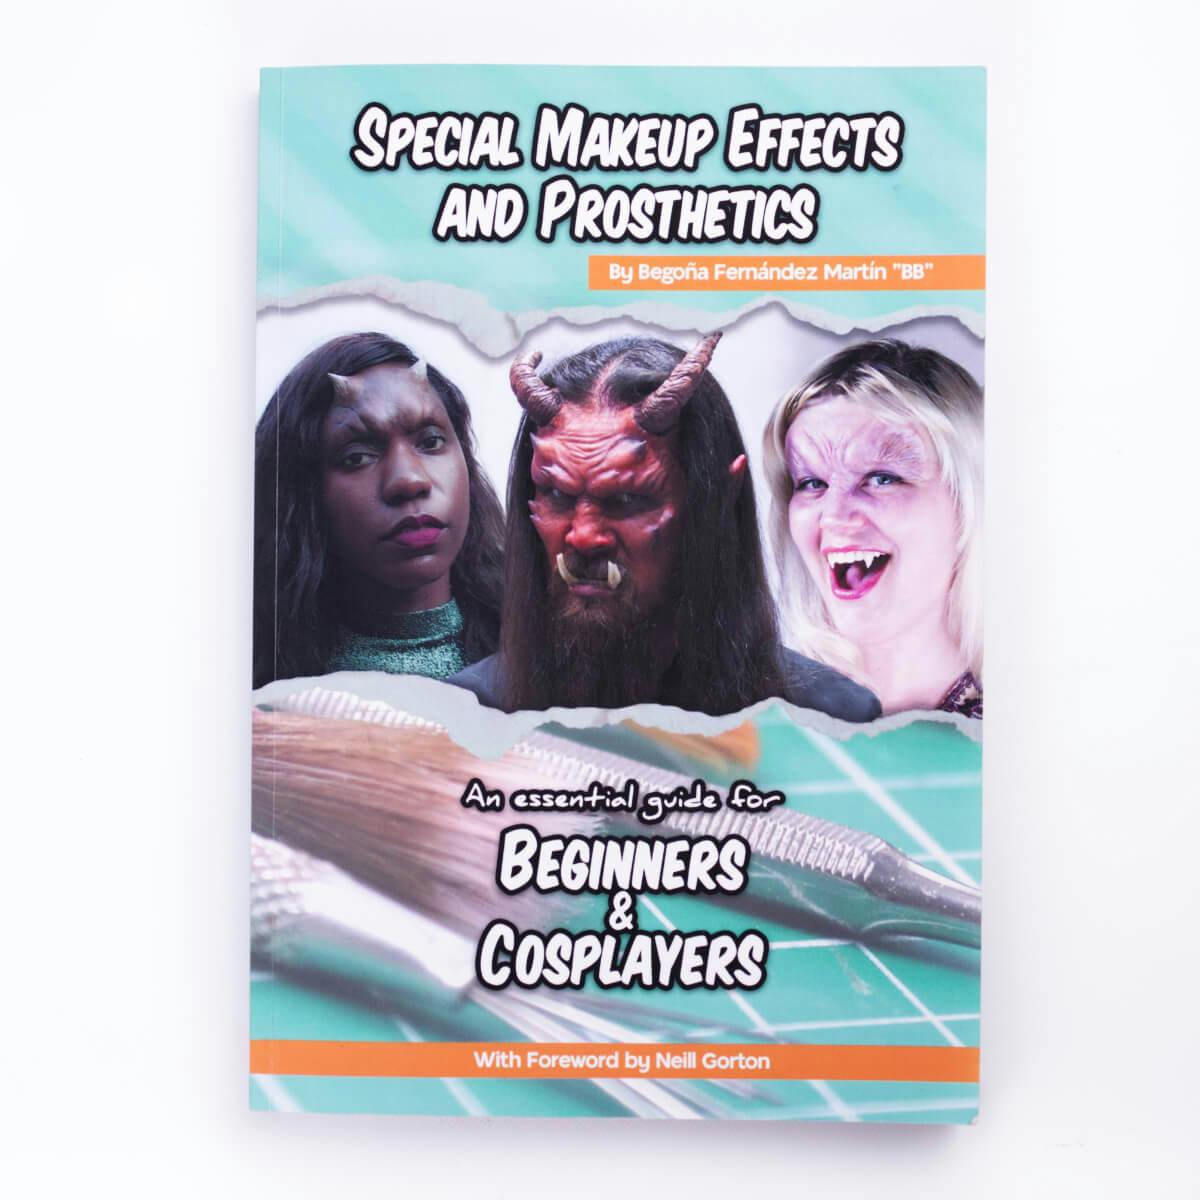 Kniha Special Makeup Effects and Prosthetics - the essential guide for beginners and cosplayers od Begoña Fernández Martín